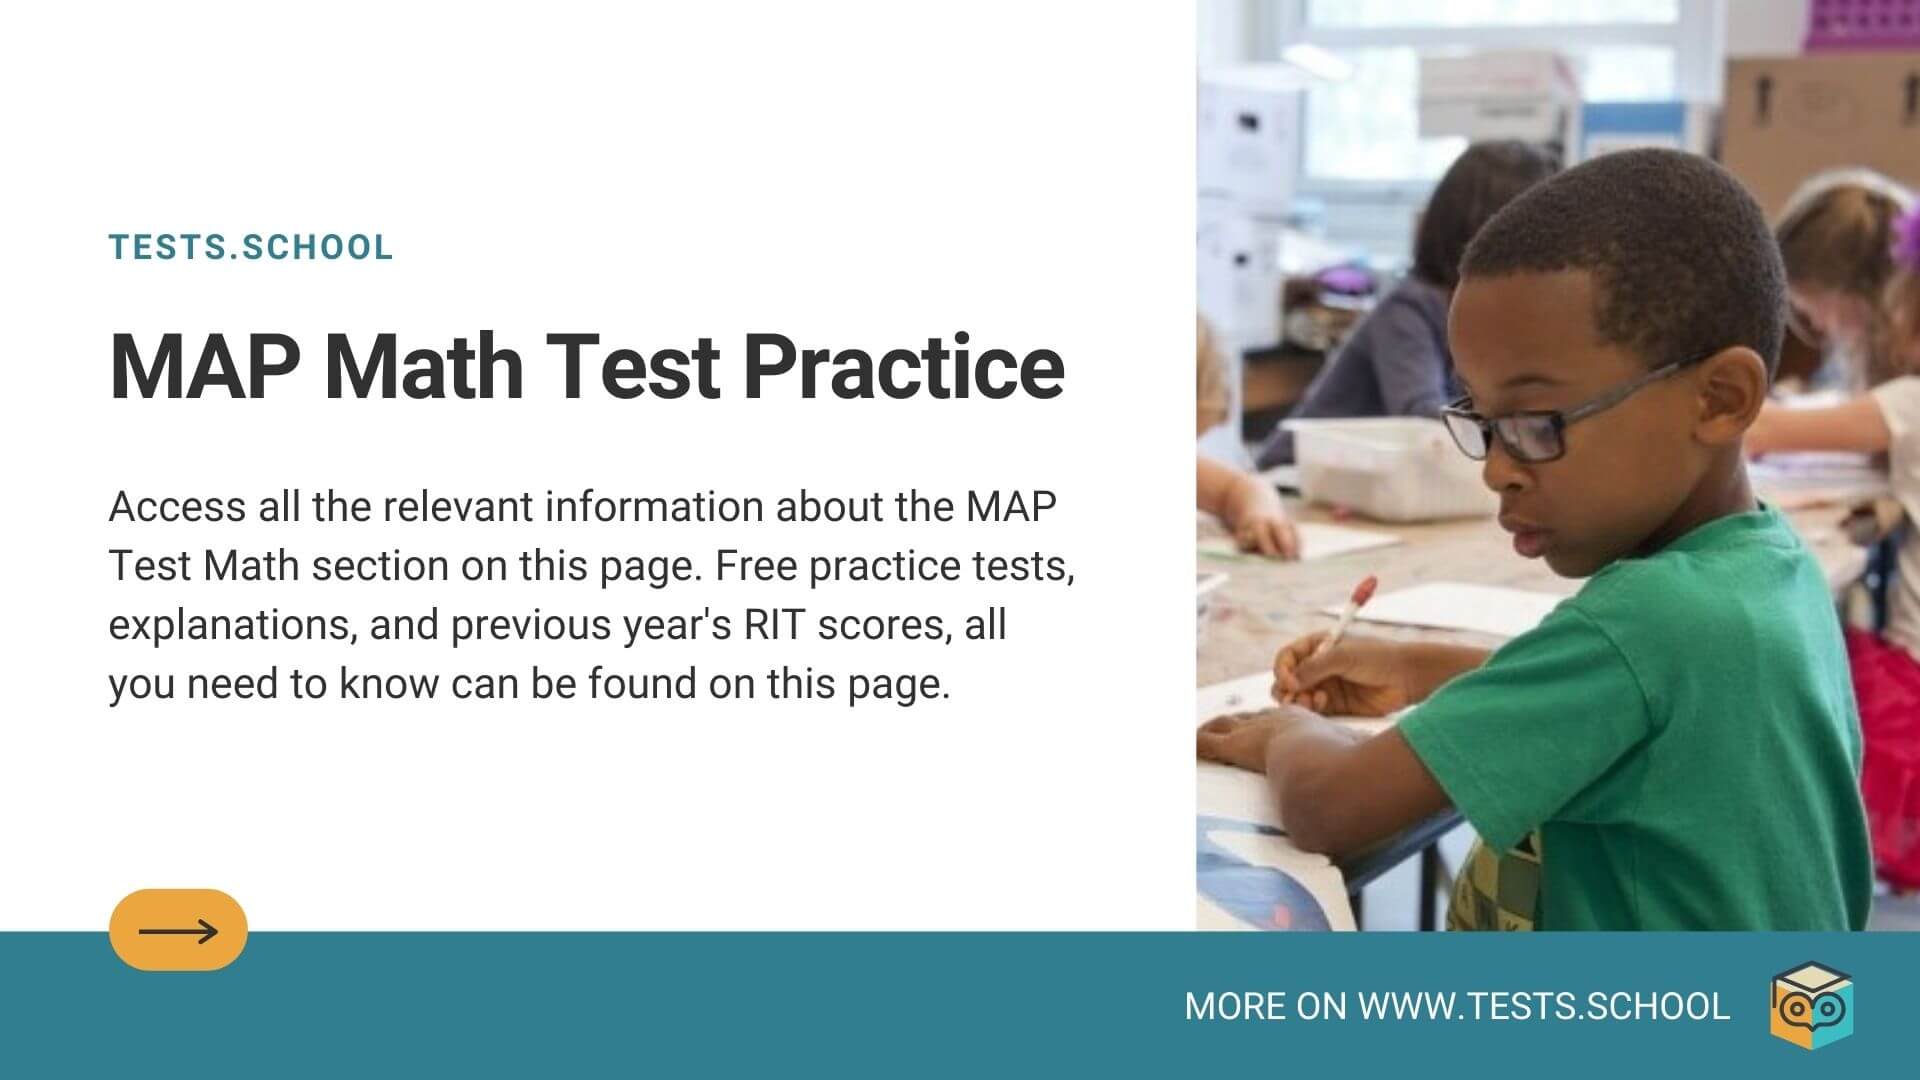 NWEA MAP Math Explained, Samples Questions & Practice Tests